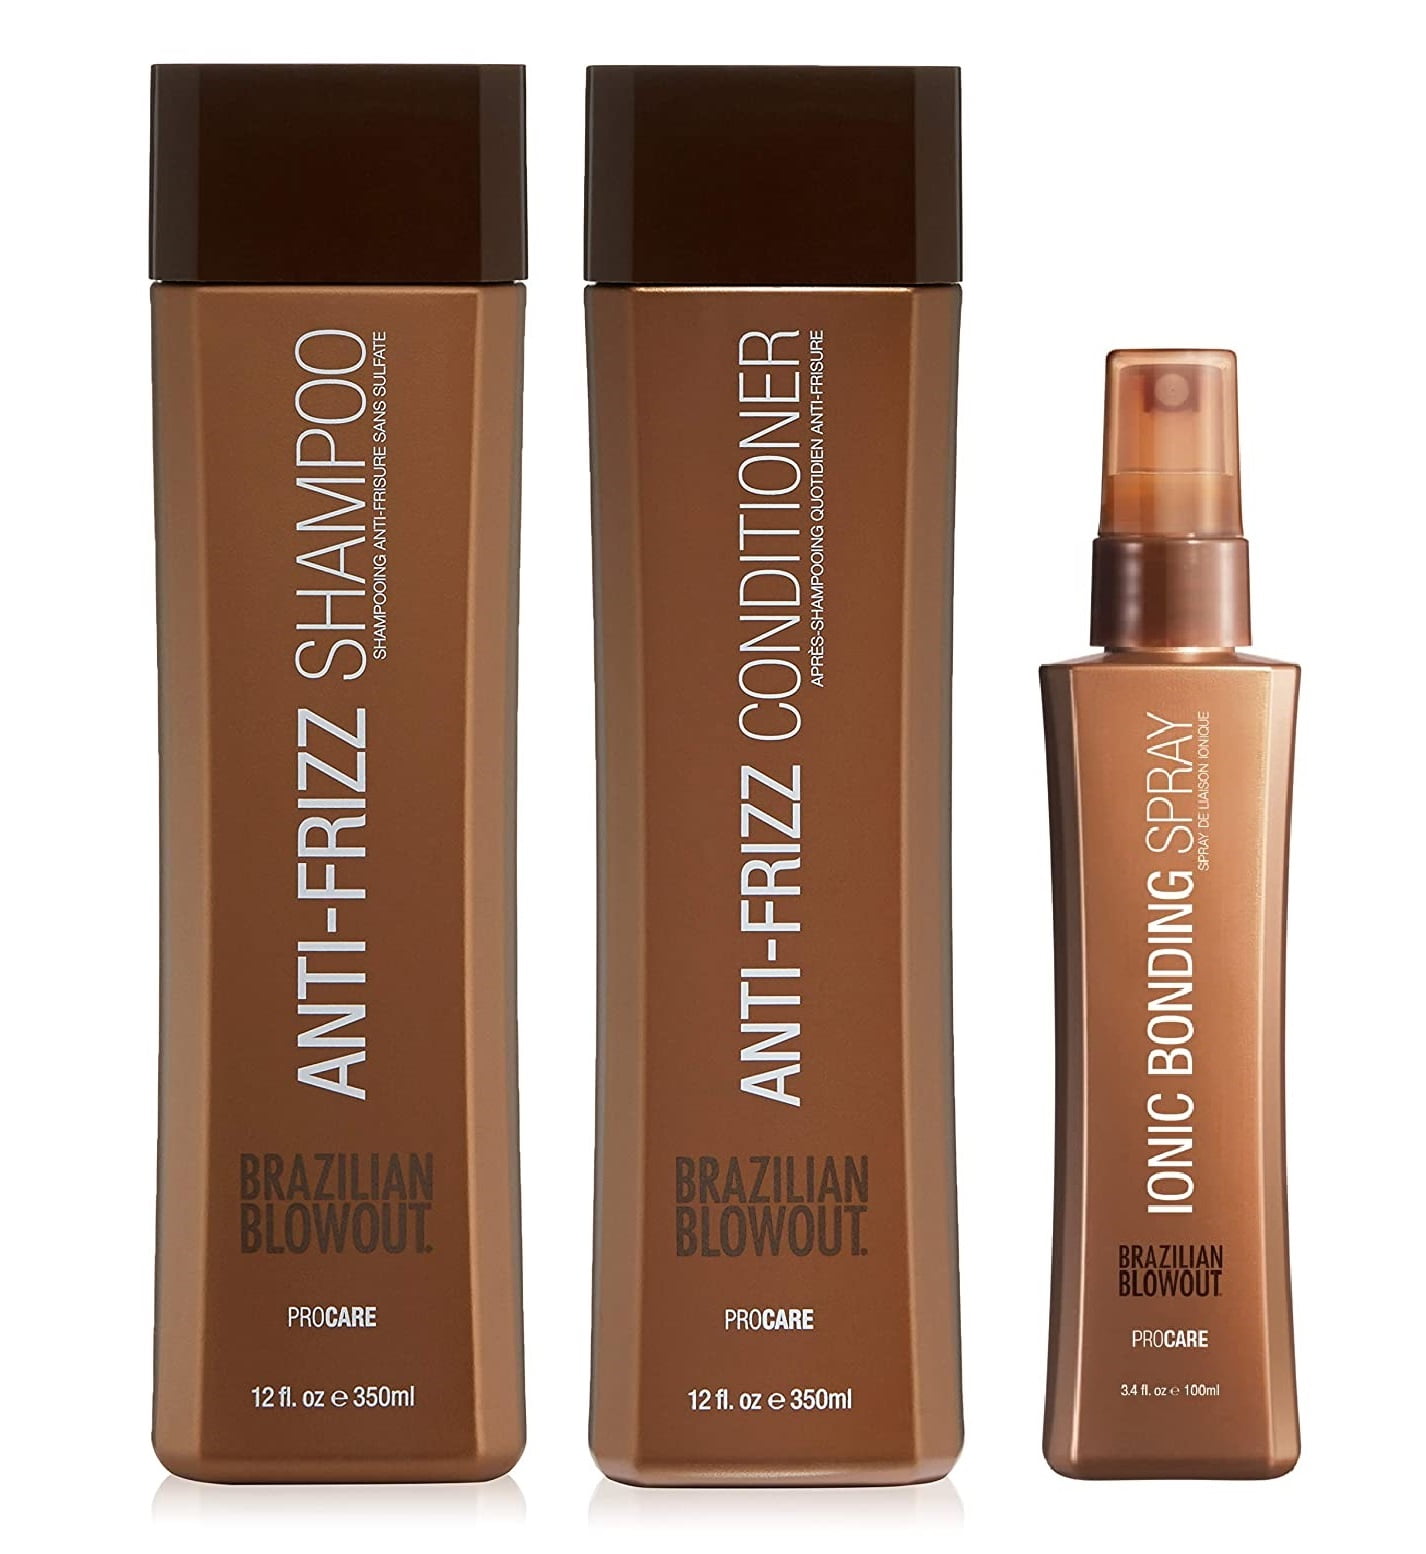 brazilian blowout travel size shampoo and conditioner